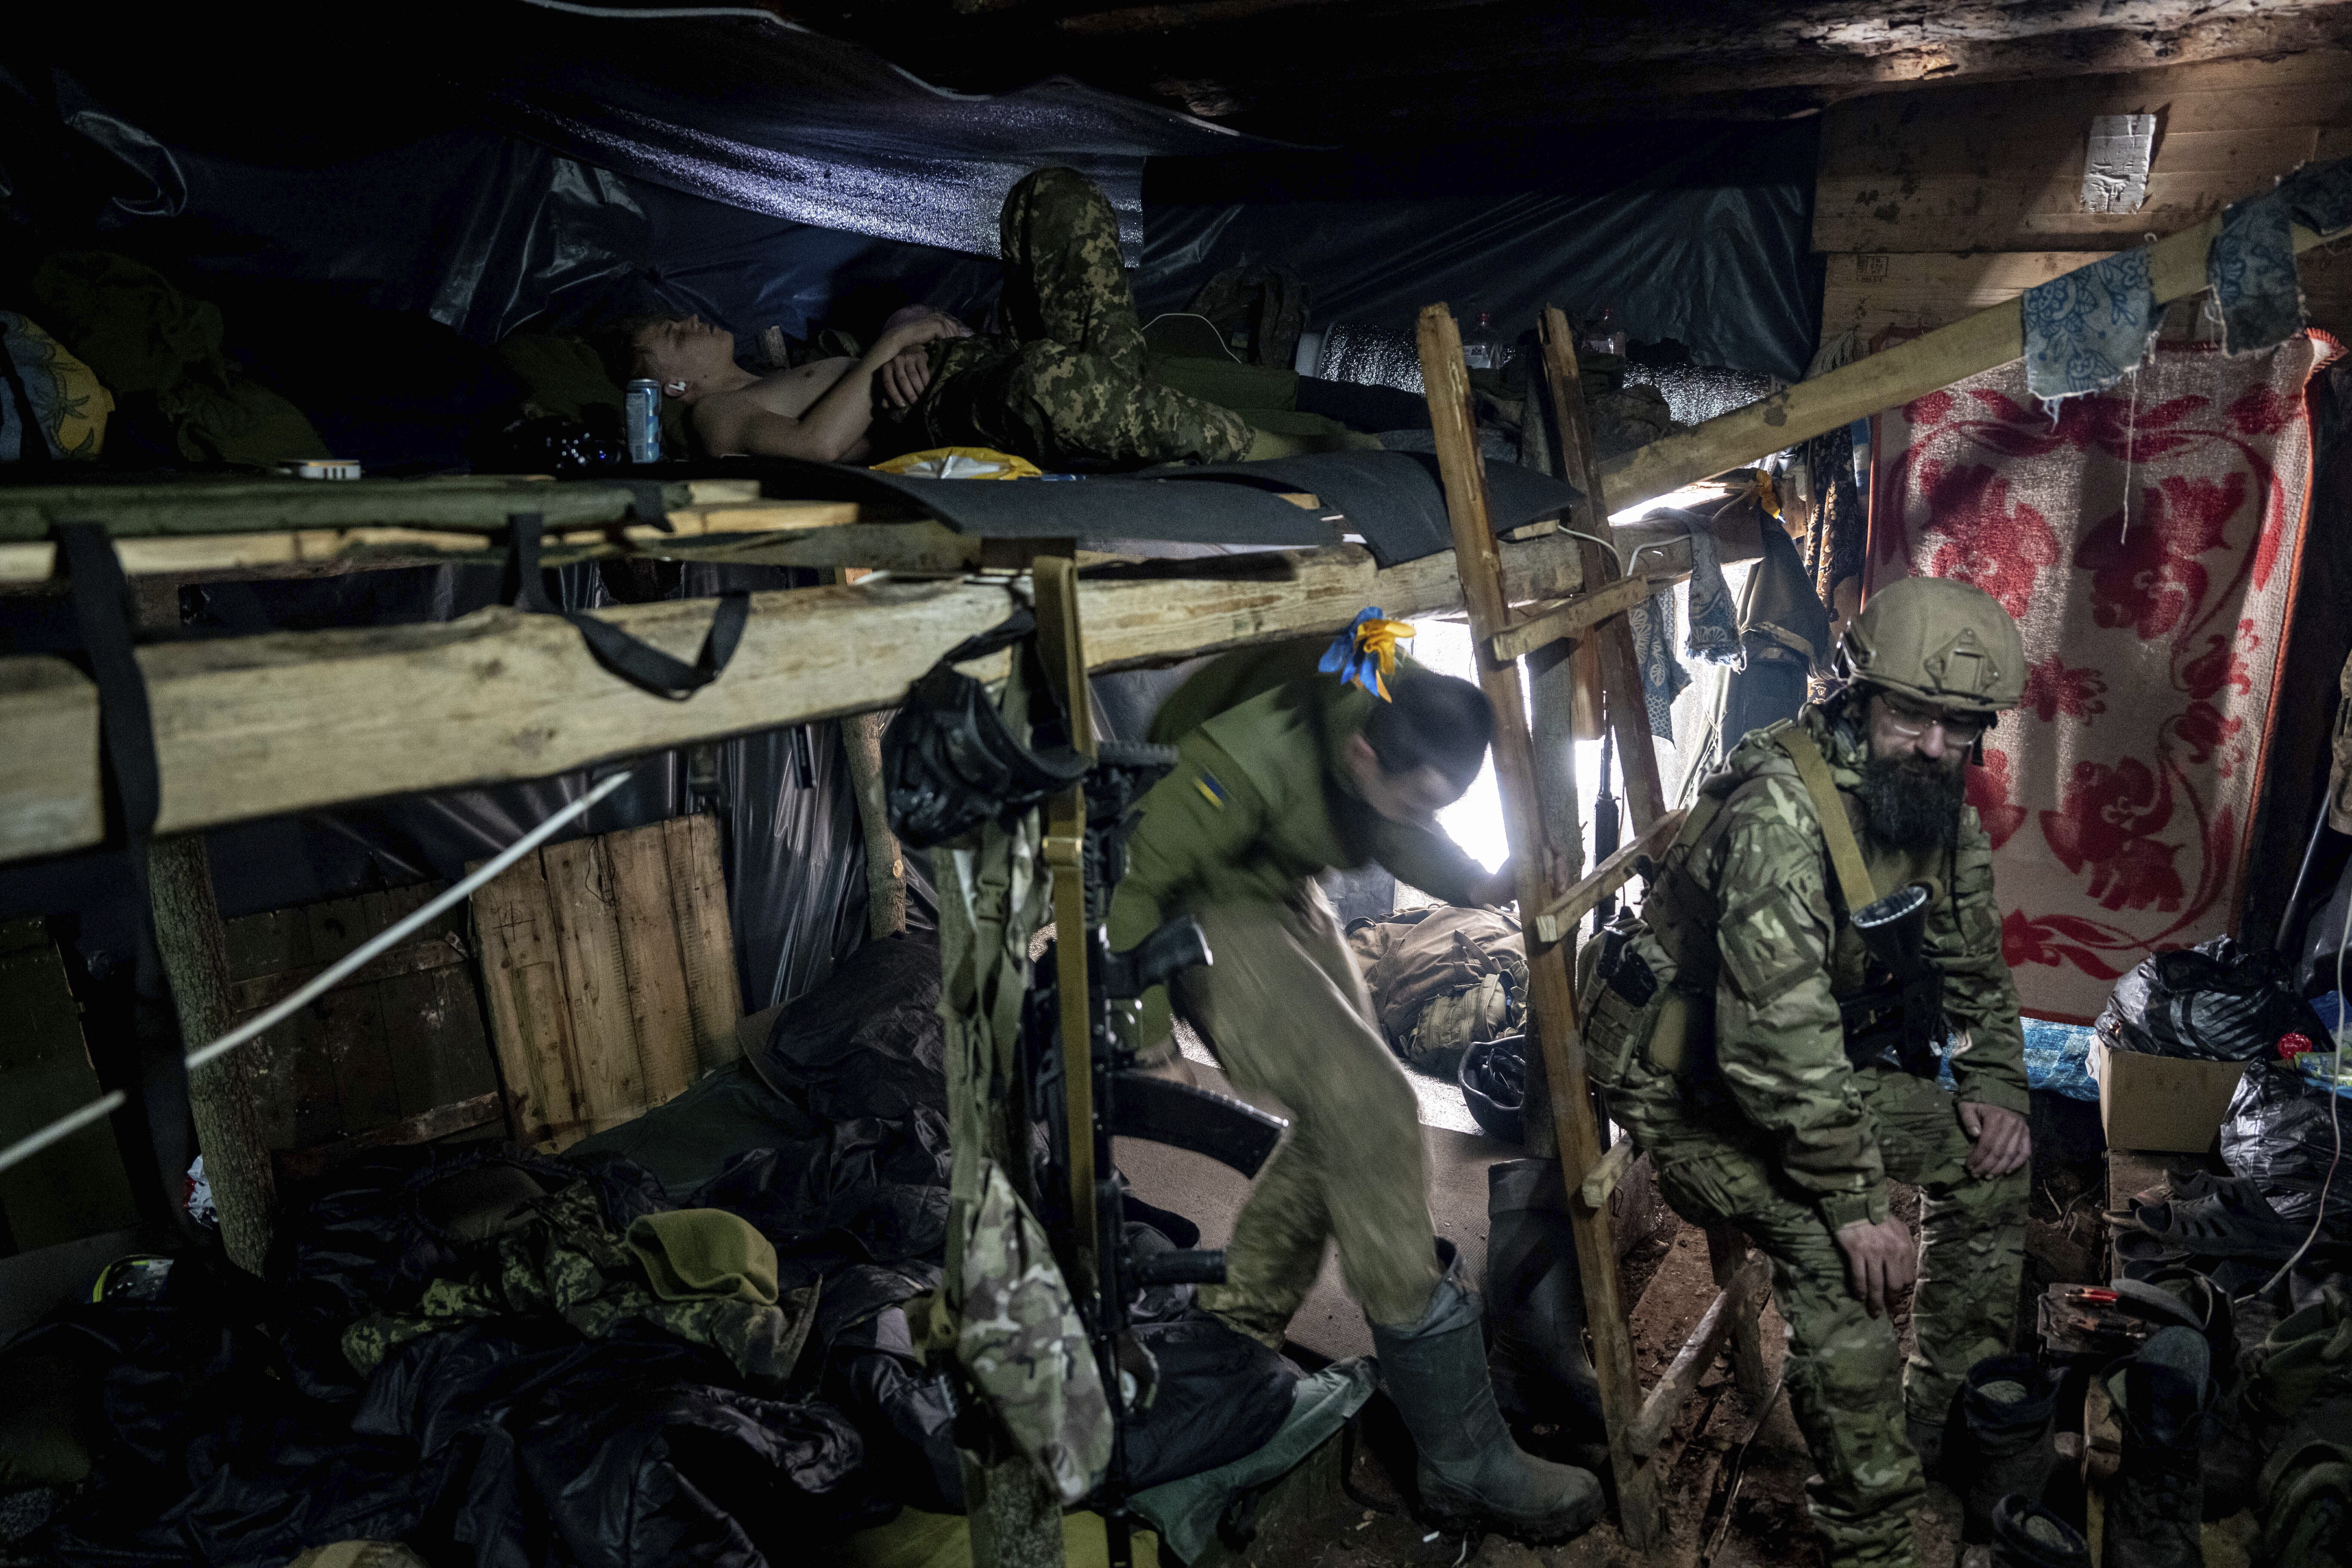 Ukrainian paratroopers from the 80th assault brigade rest inside a trench at the front lines near Bakhmut, Ukraine, on March 10, 2023. (AP Photo/Evgeniy Maloletka)